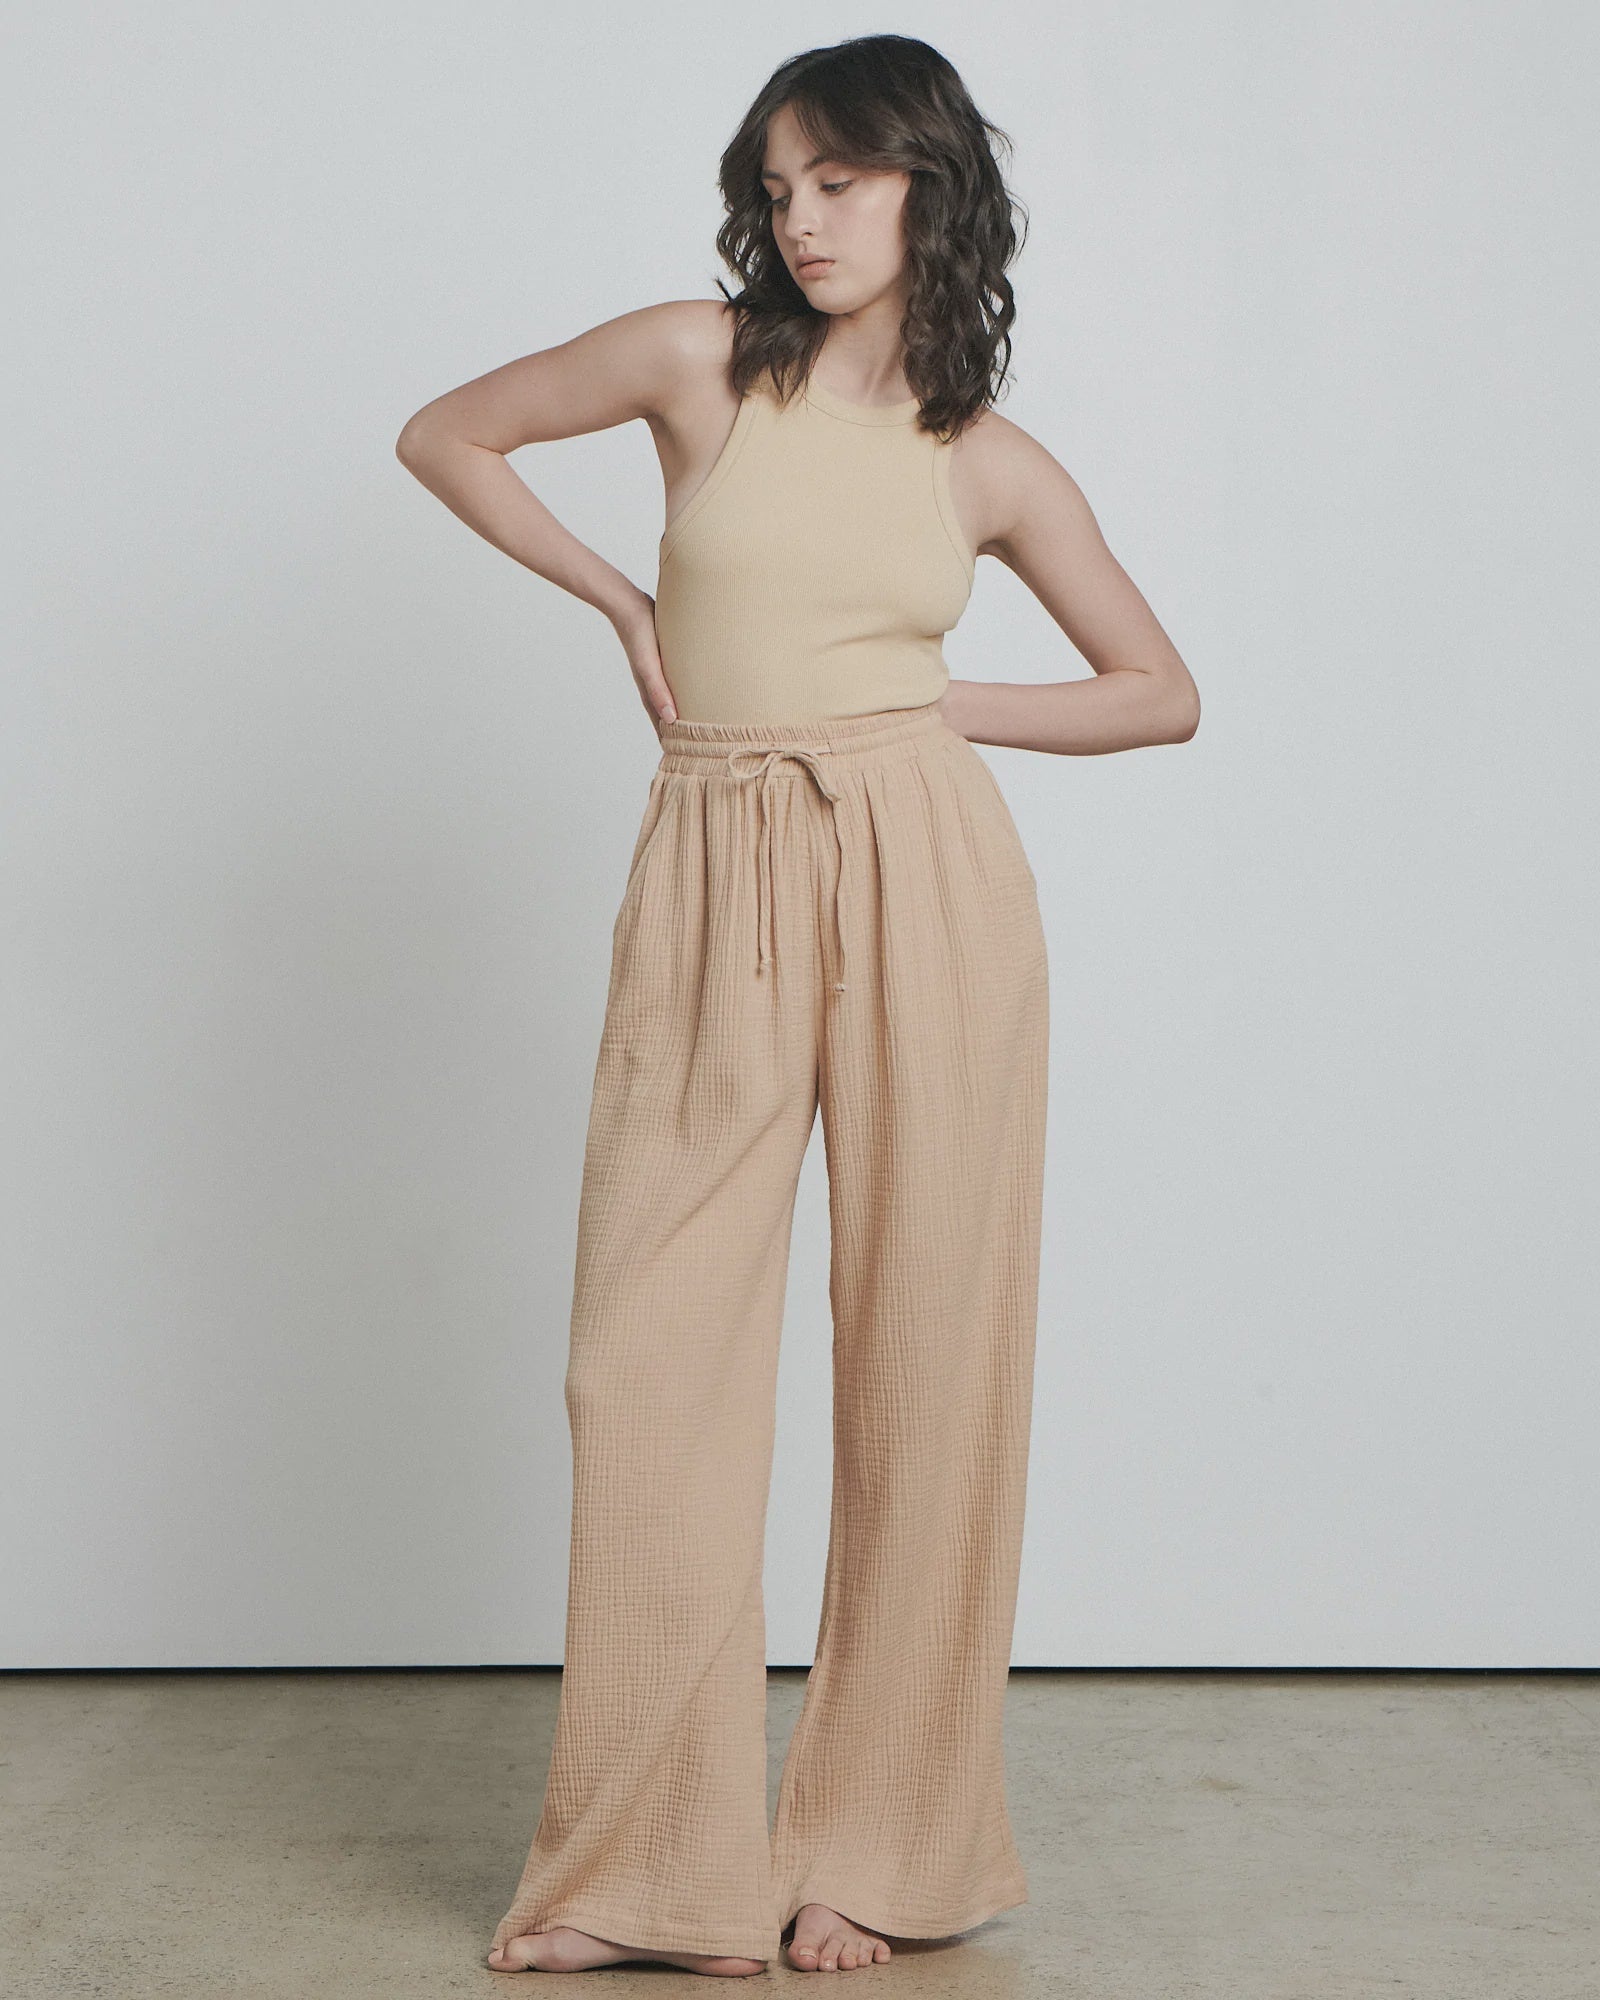 BARE BY CHARLIE HOLIDAY - THE BEACH PANT - SAND